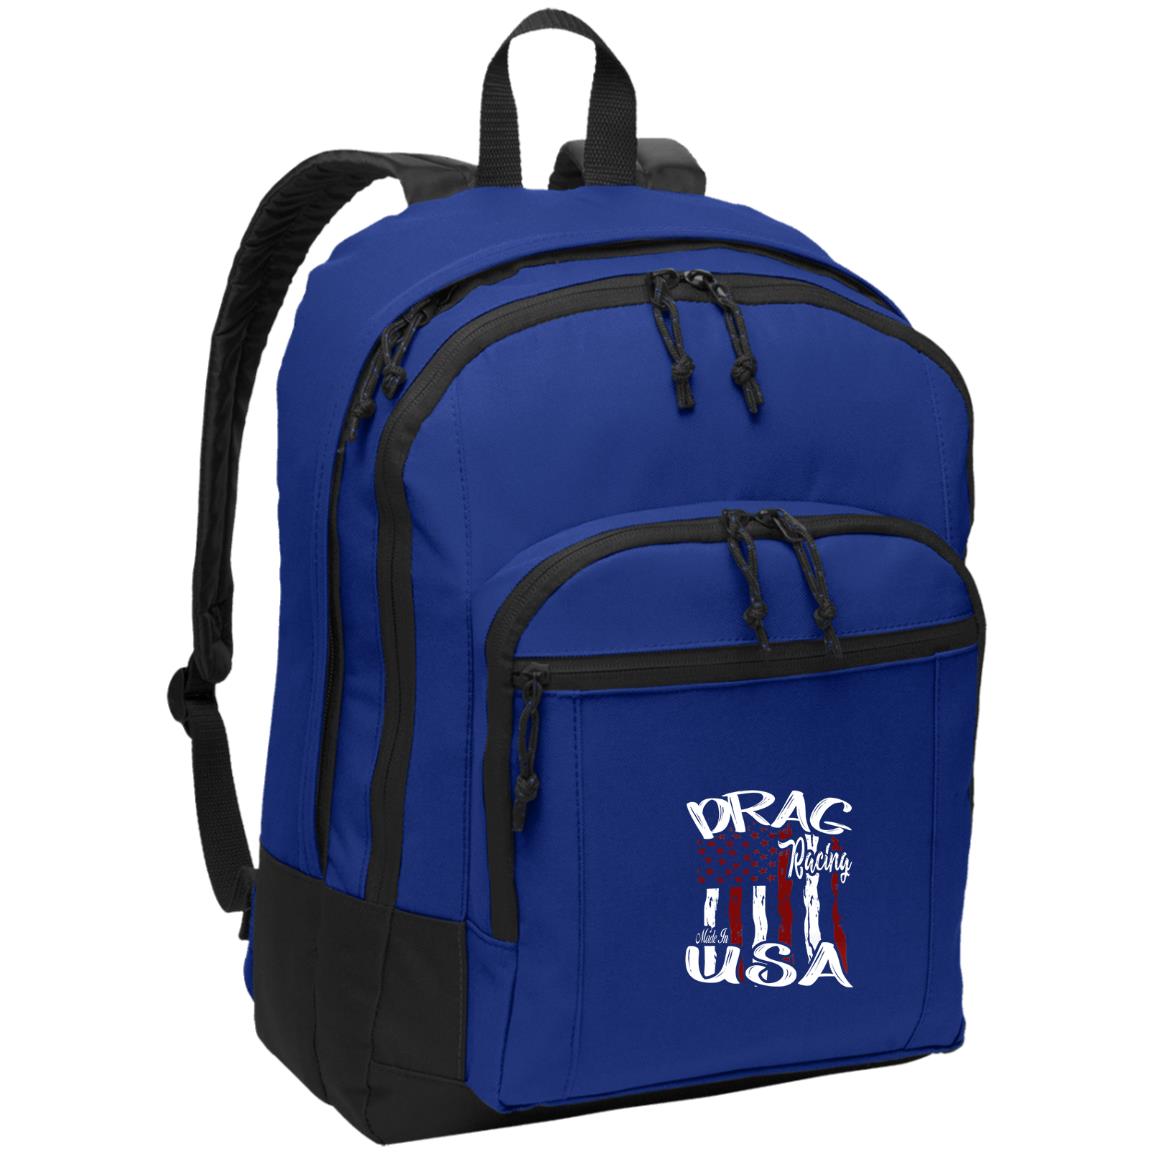 Drag Racing Made In USA Basic Backpack